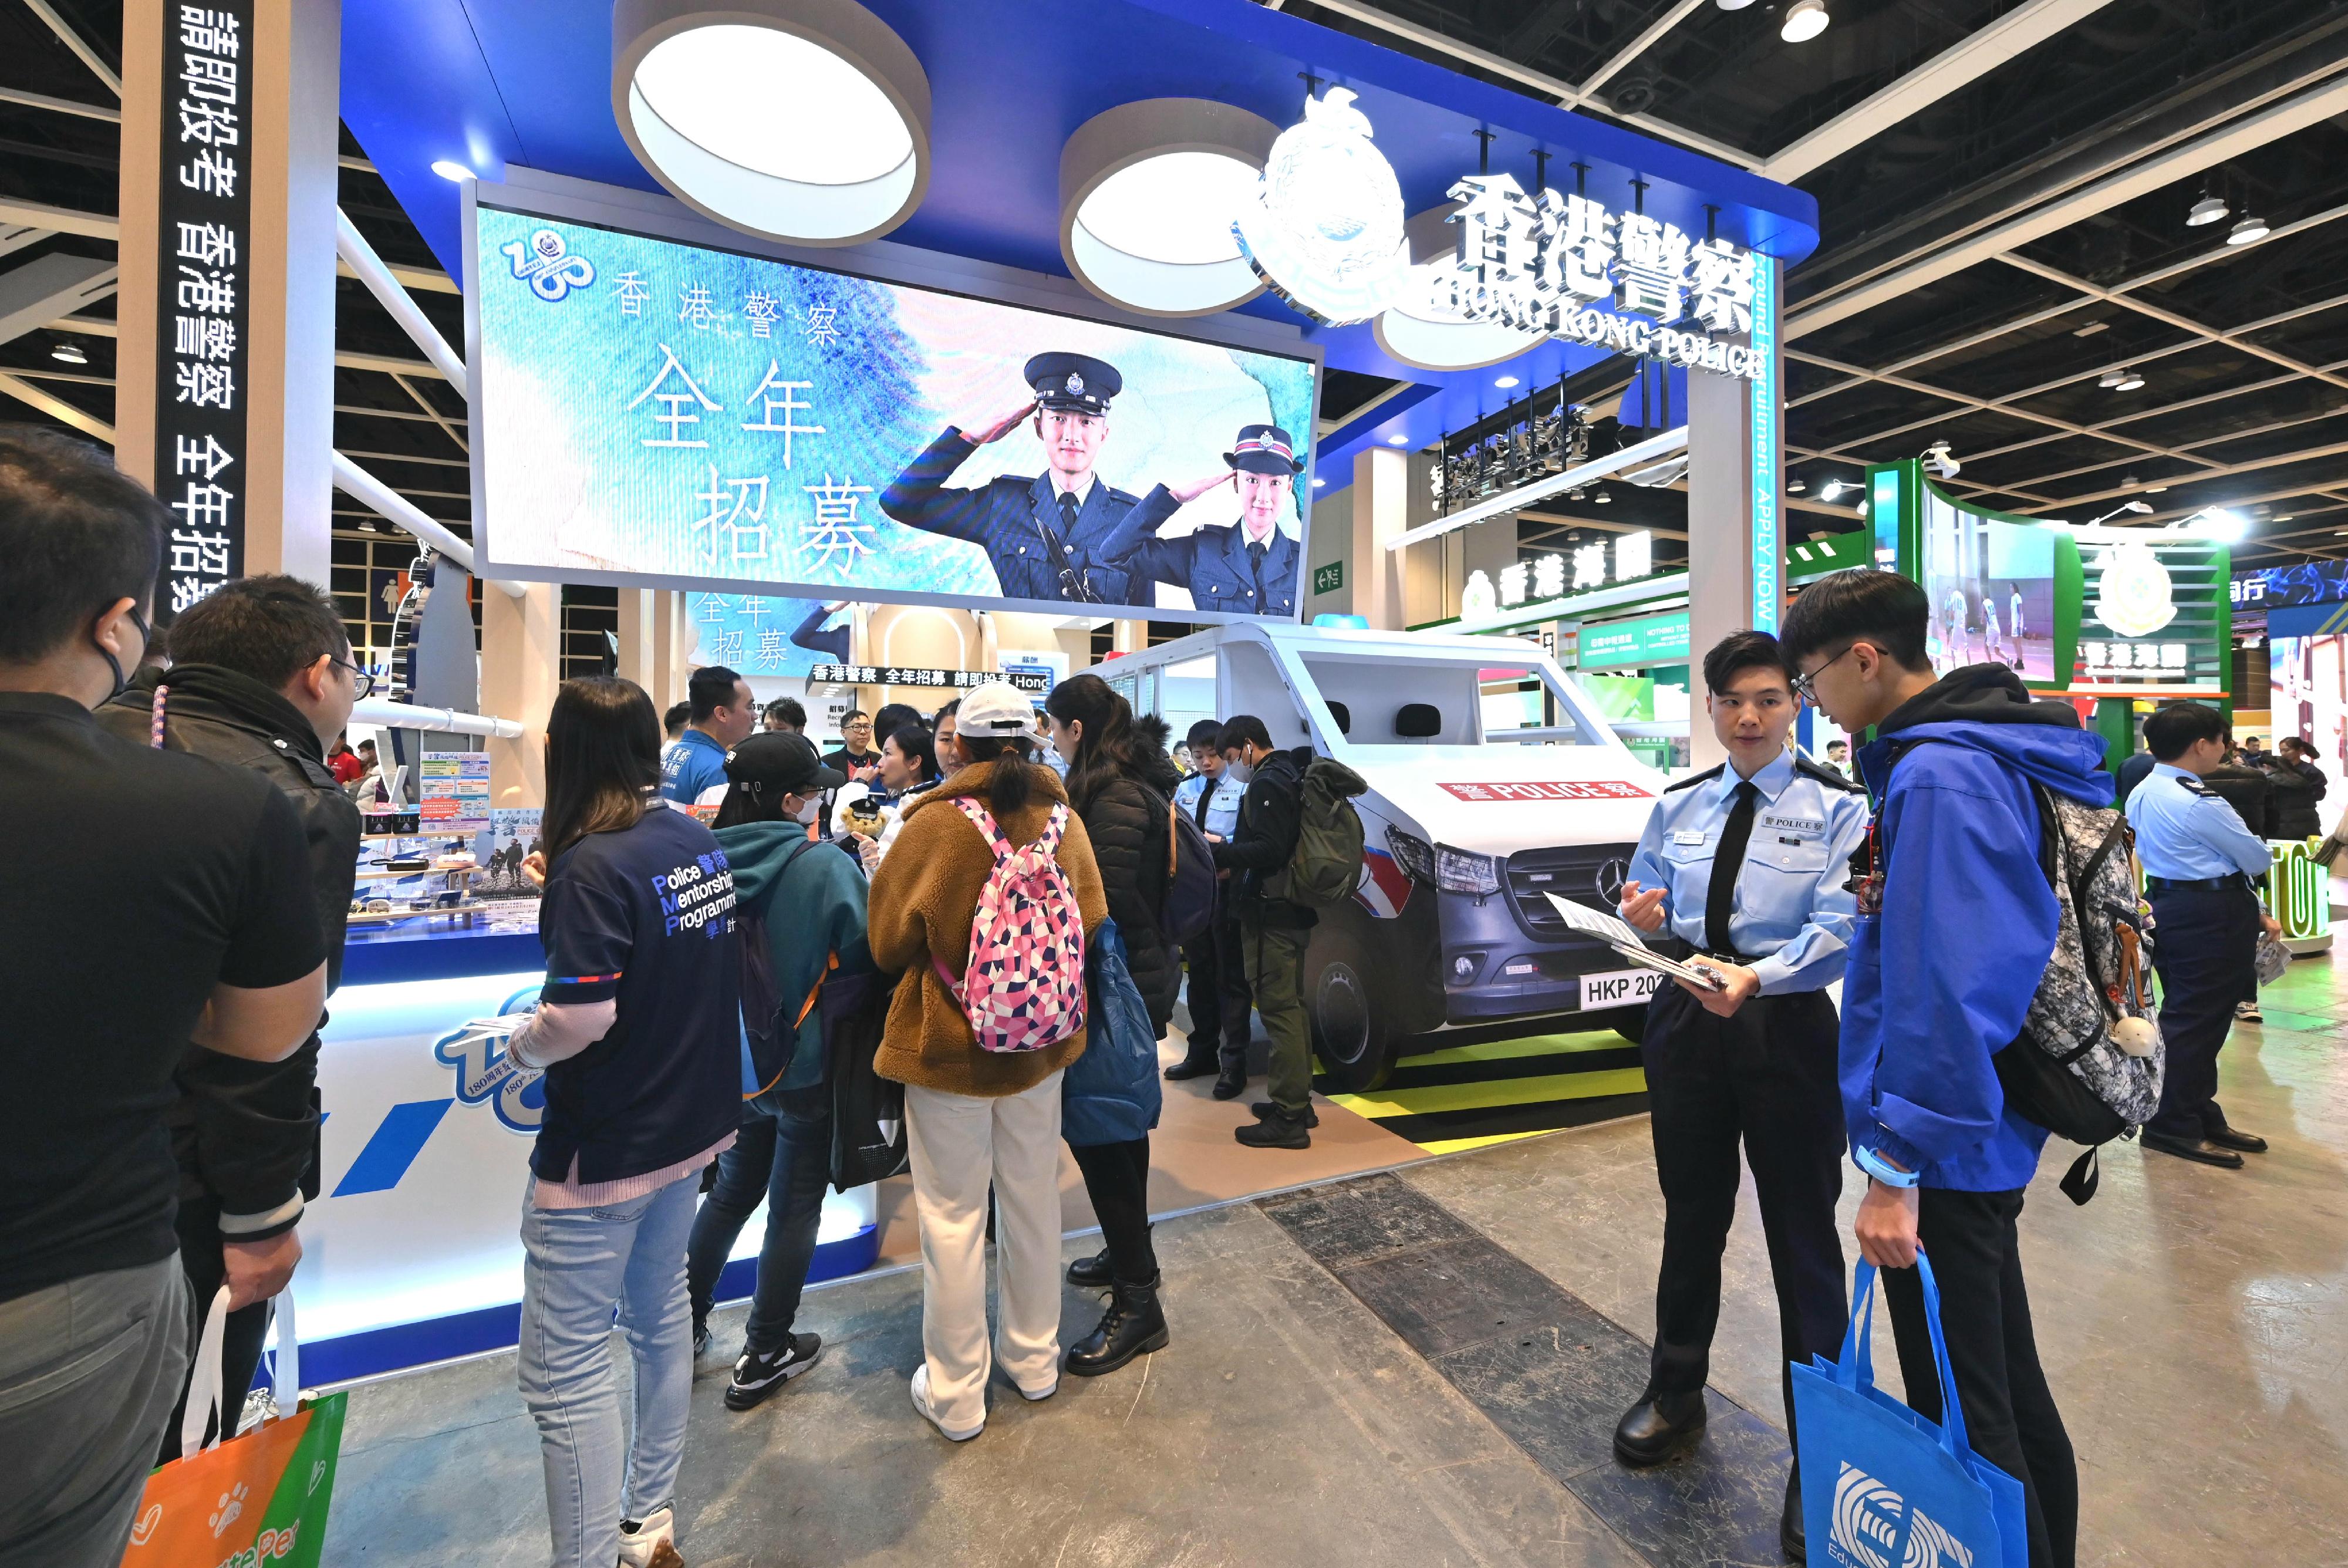 The Hong Kong Police Force introduces its work and provides recruitment information to visitors at the Education and Careers Expo 2024 for four consecutive days from today (January 25). It was the first time a "Recruitment Emergency Unit Car" being set up at the booth for visitors to attend on-site group interview sessions for Police Constable.